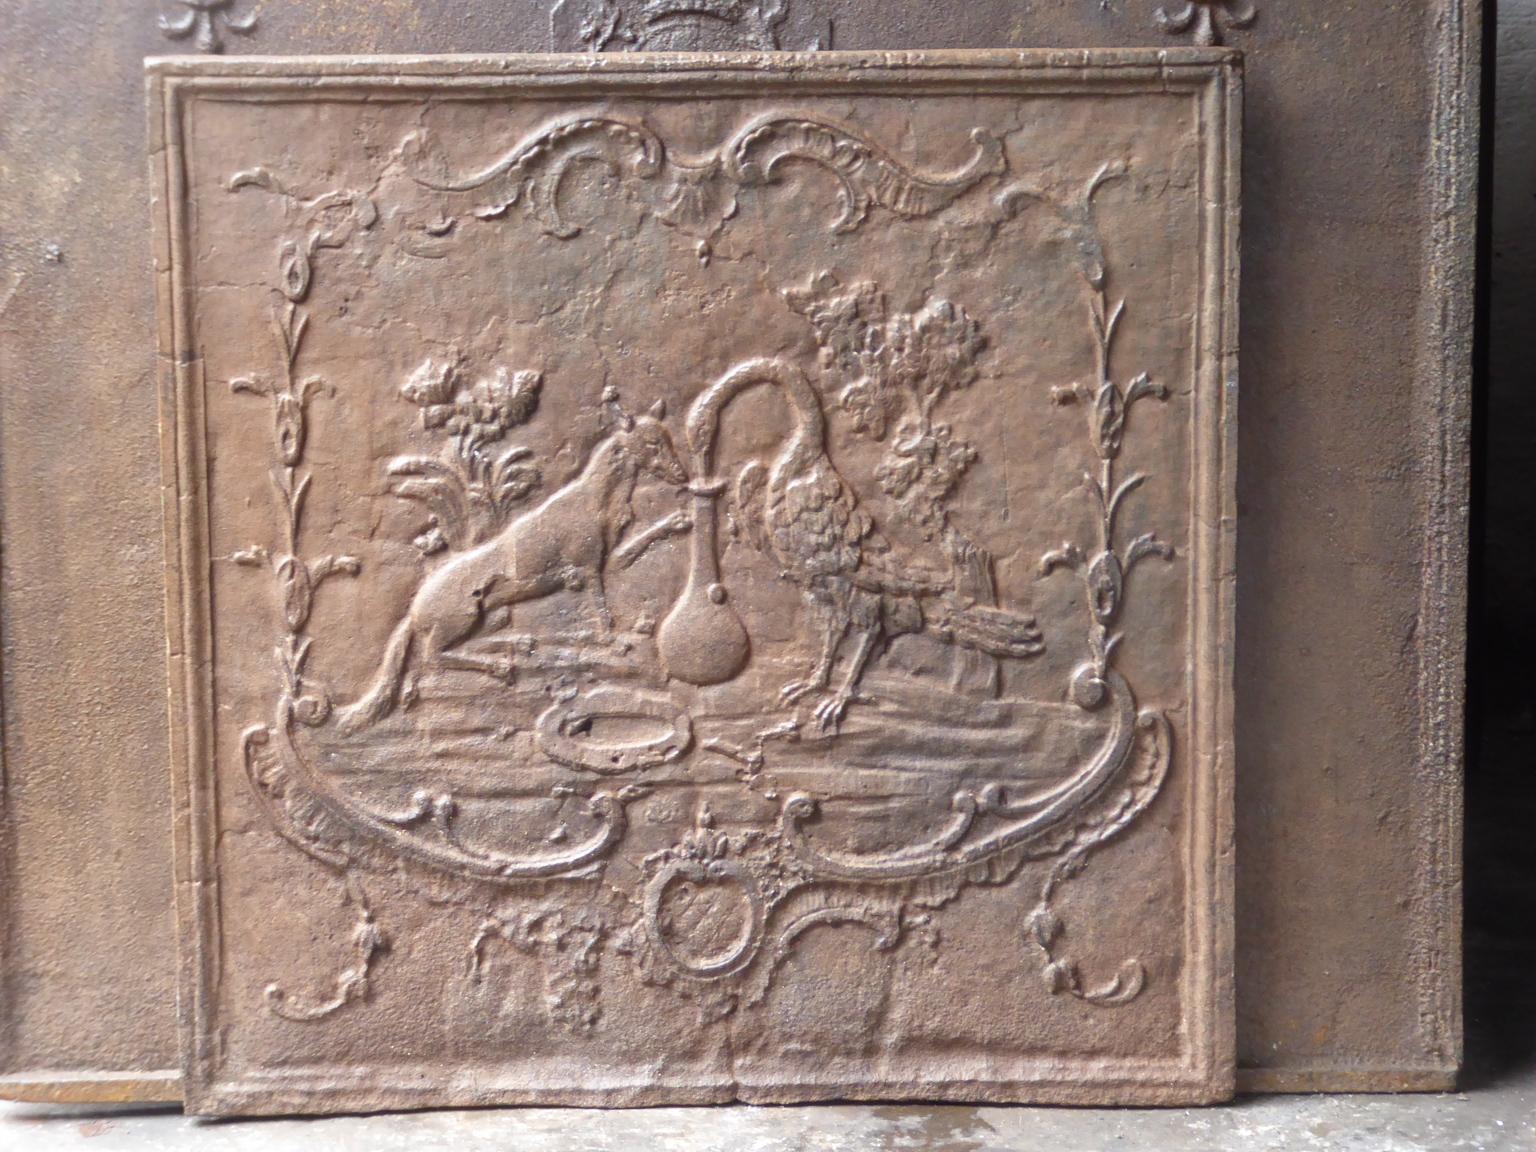 18th century French Louis XV fireback which depicts the fable of the fox and the stork (Jean de la Fontaine 1621-1695). The fox invites the stork to eat out. He gives him soup in a flat plate, so the stork in unable to drink anything. He leaves no